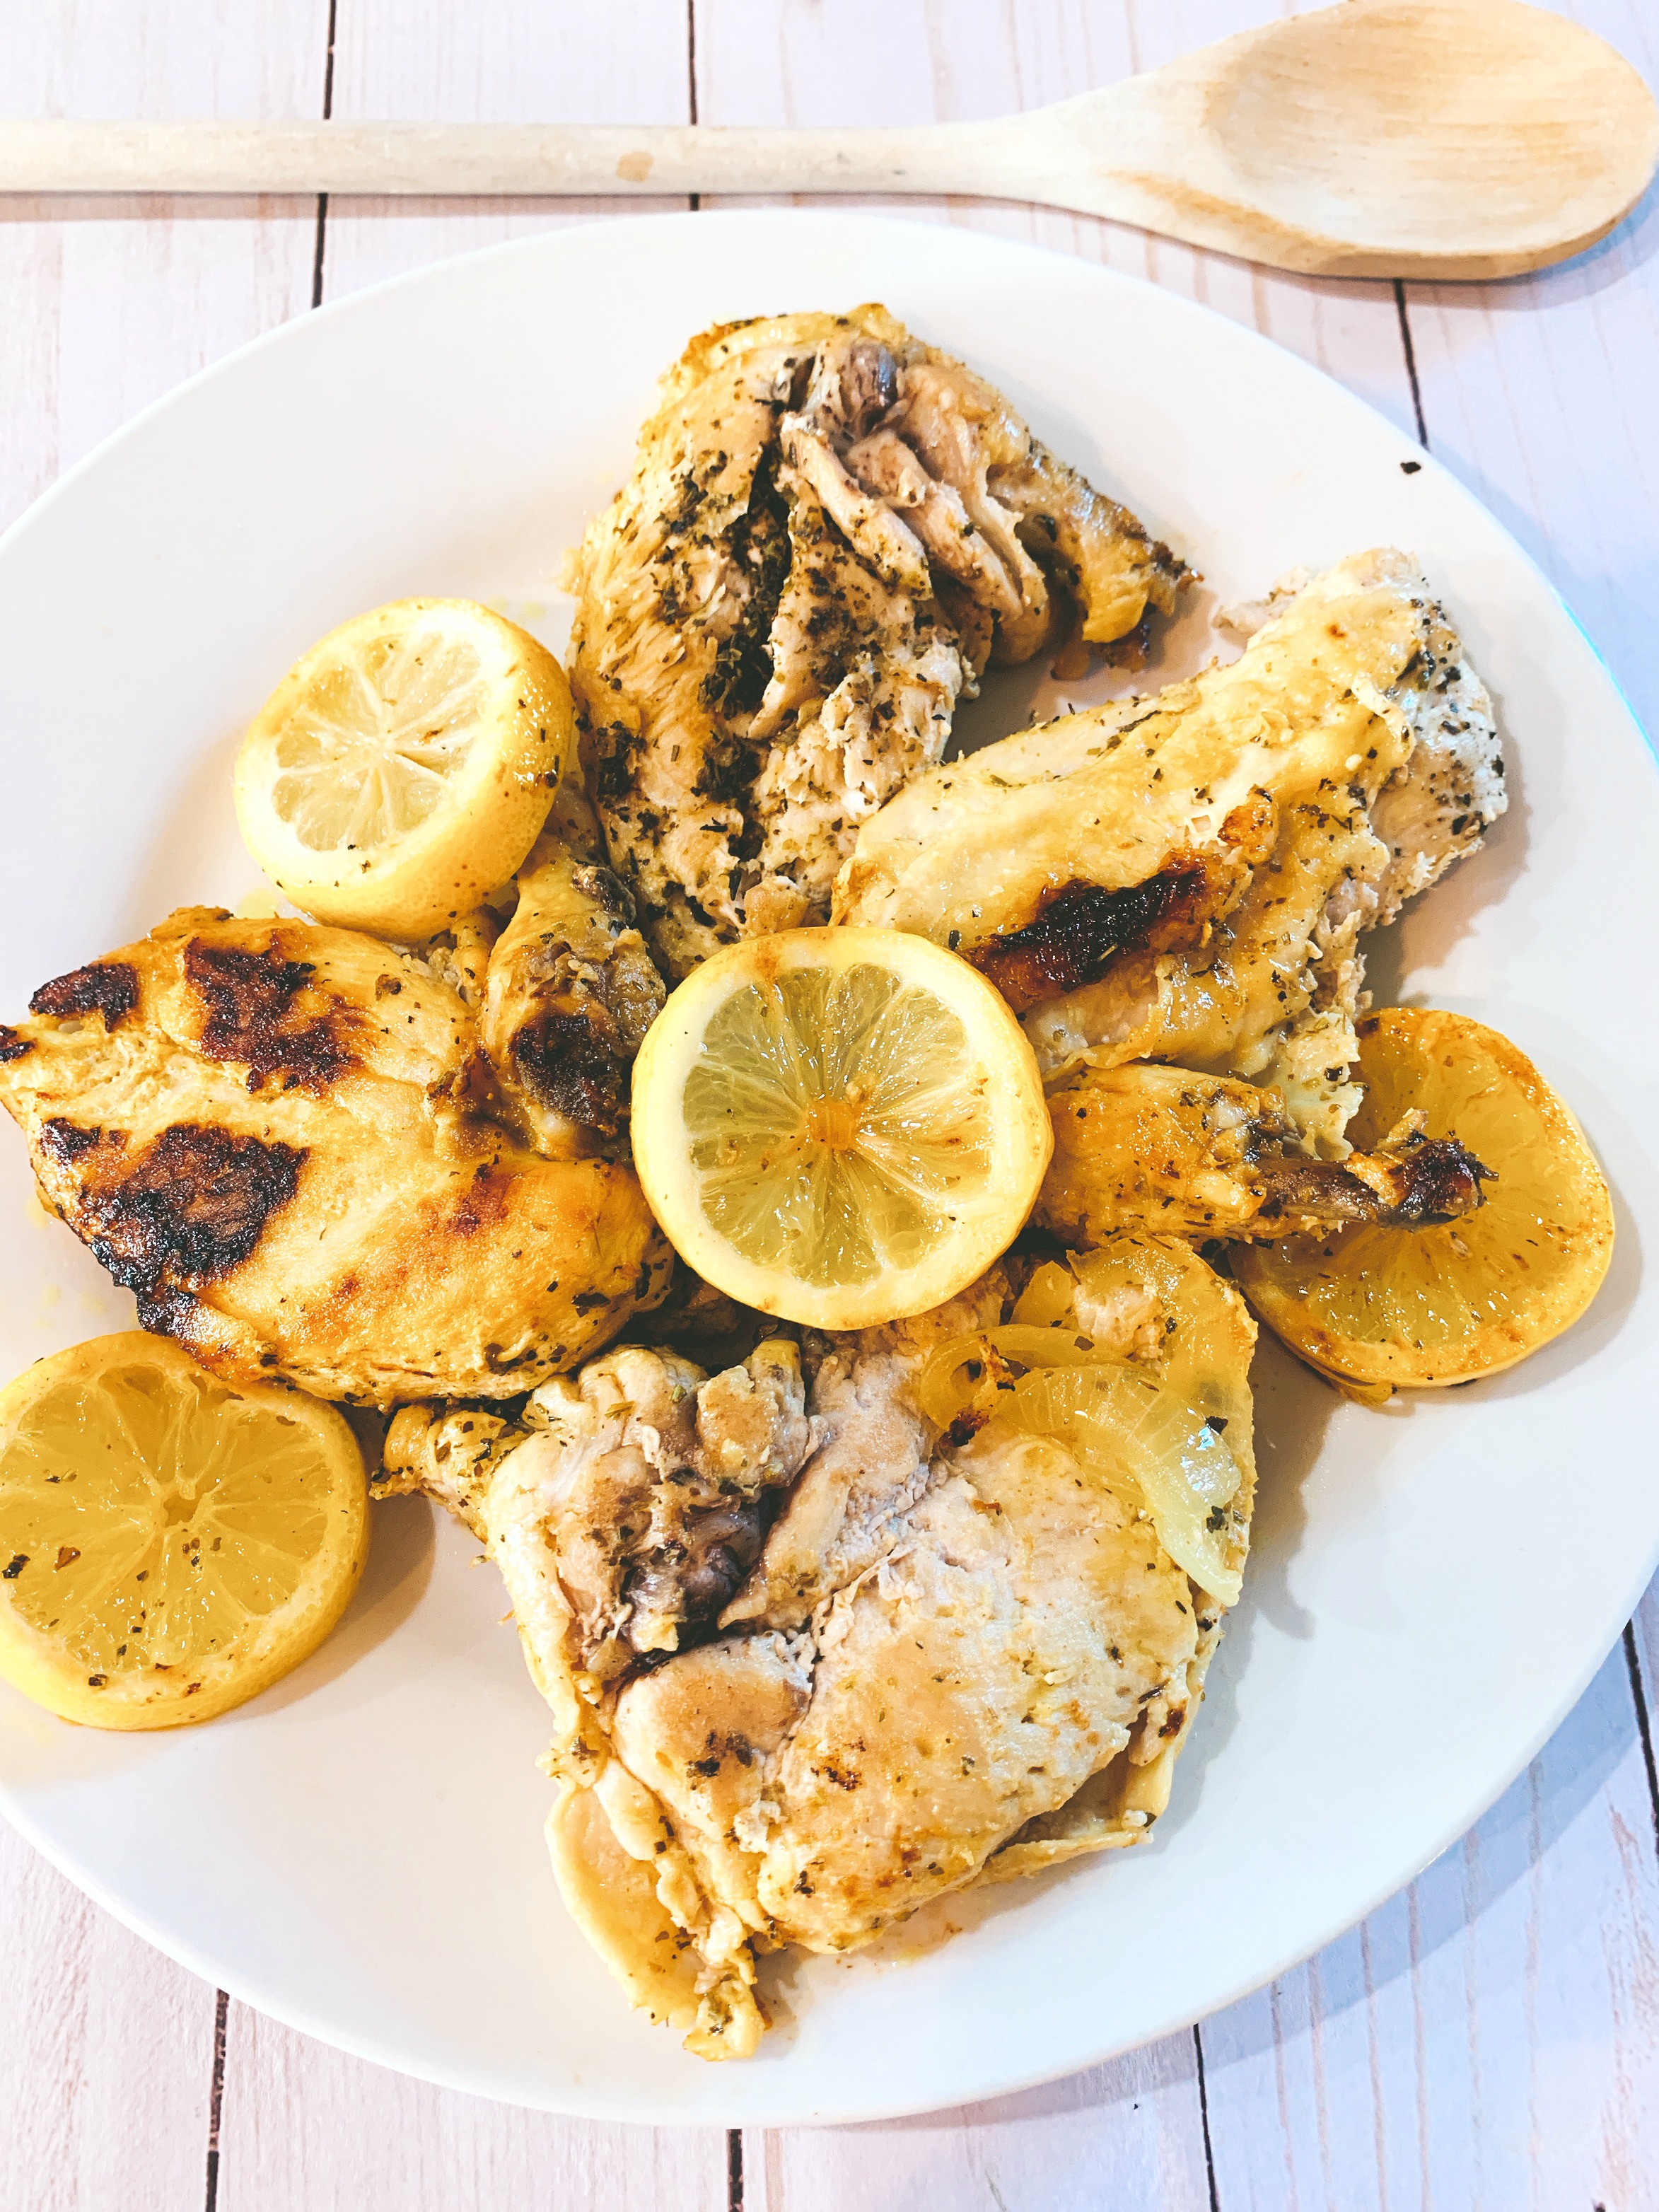 Instant Pot Lemon Chicken Recipe: Easy, Fast and Healthy!